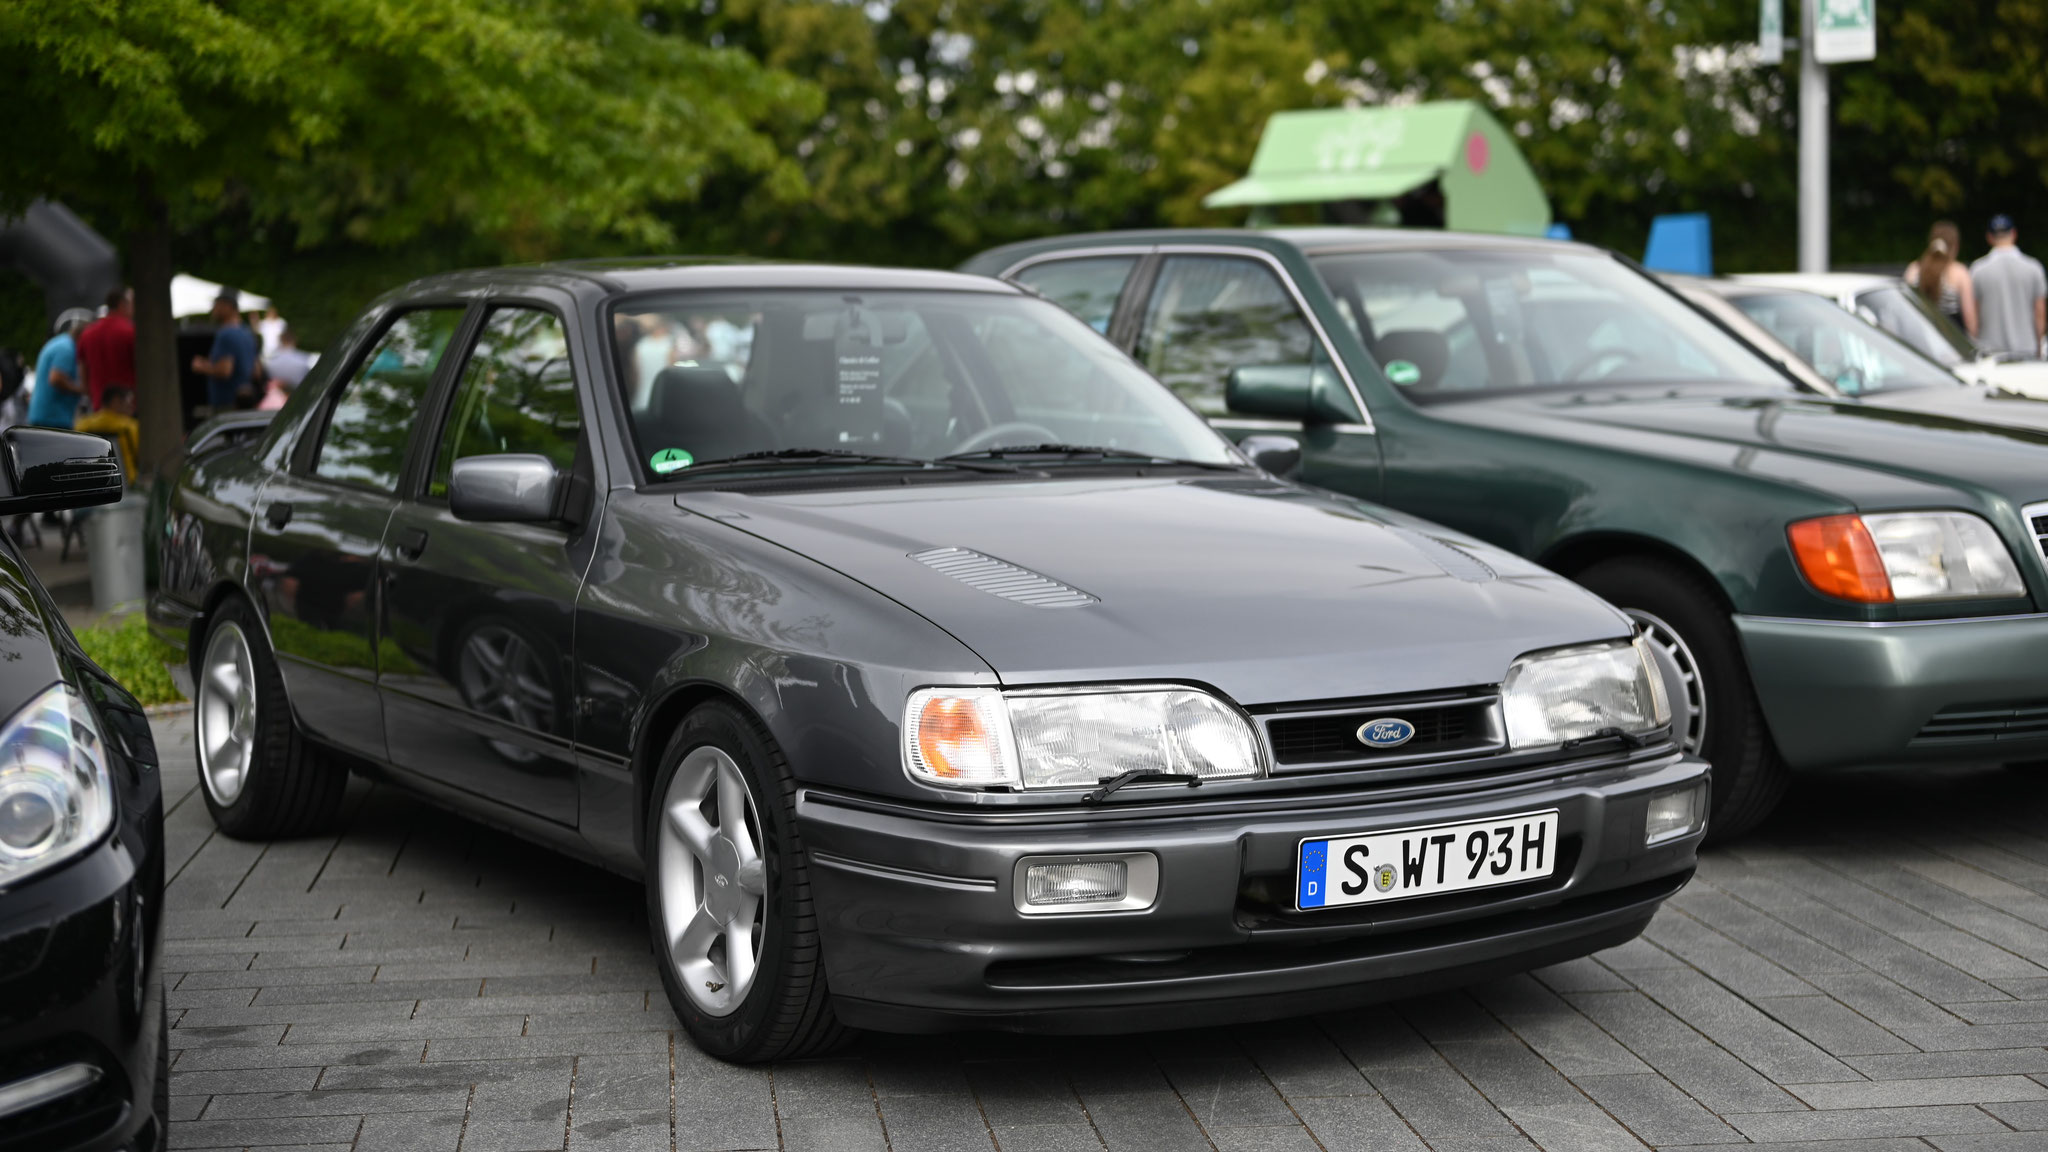 Ford Sierra RS Cosworth - S-WT93H